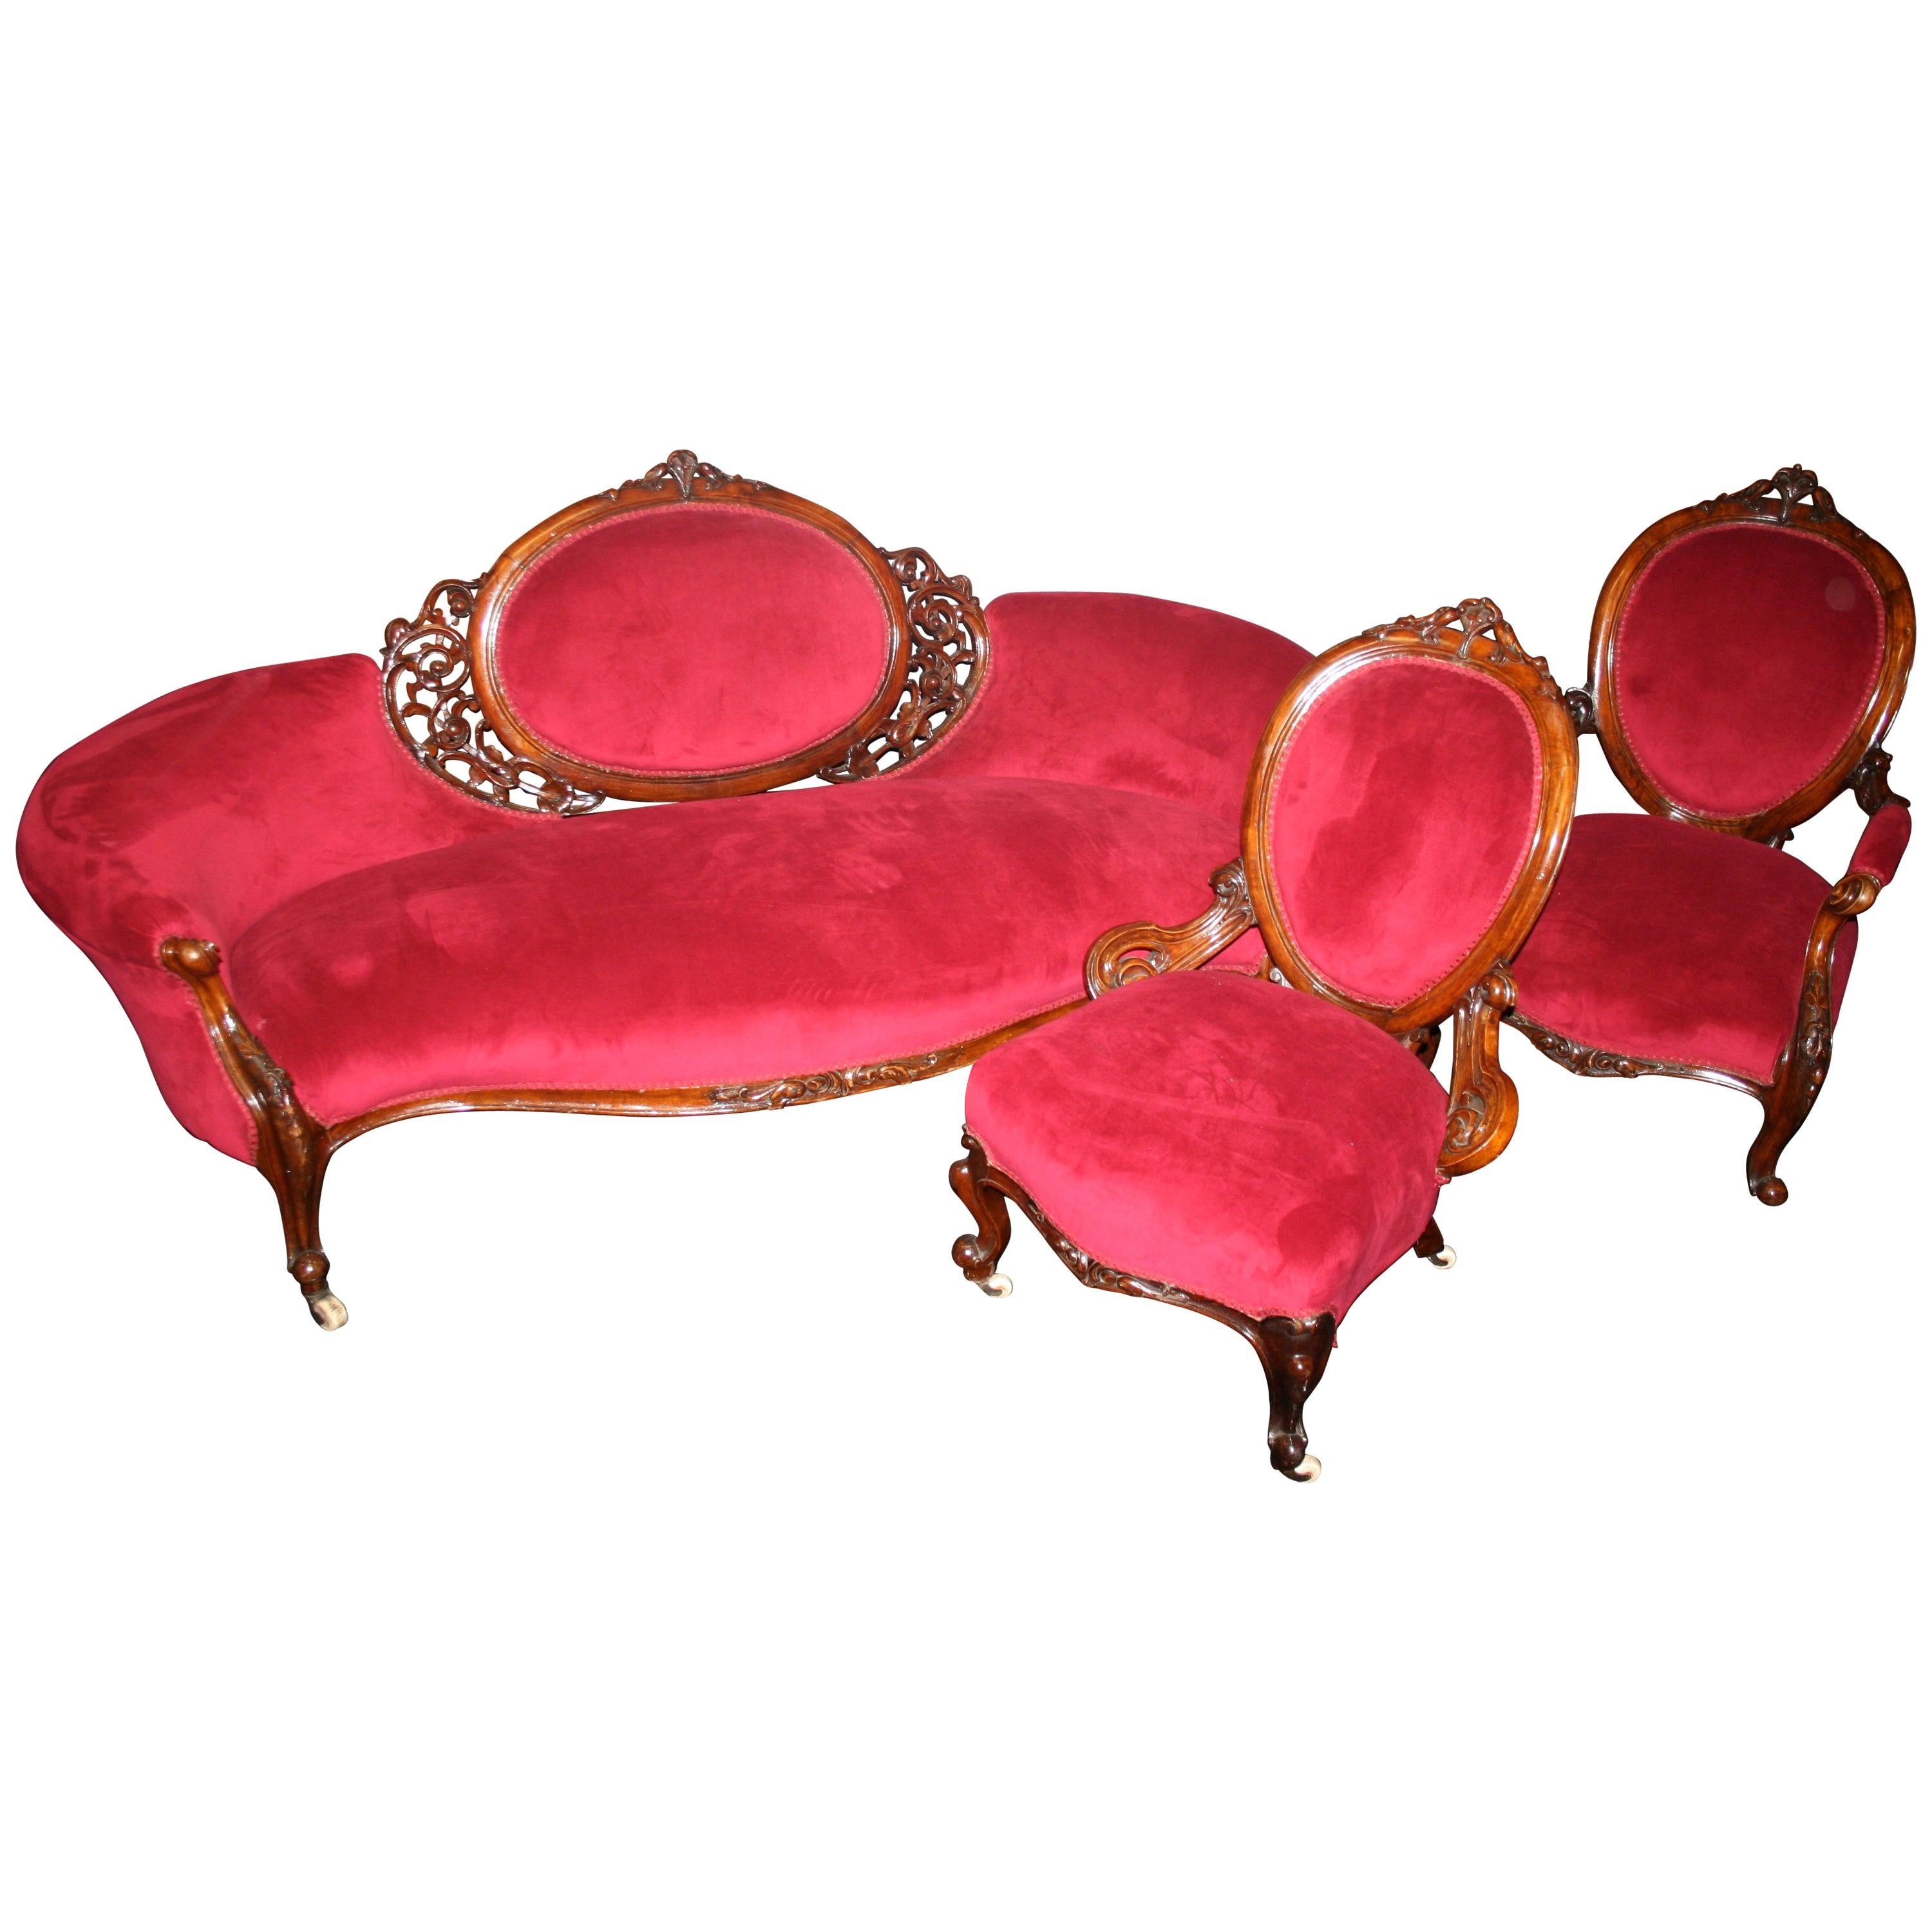 Early Victorian Carved Walnut Upholstered Salon Suite, circa 1840 For Sale